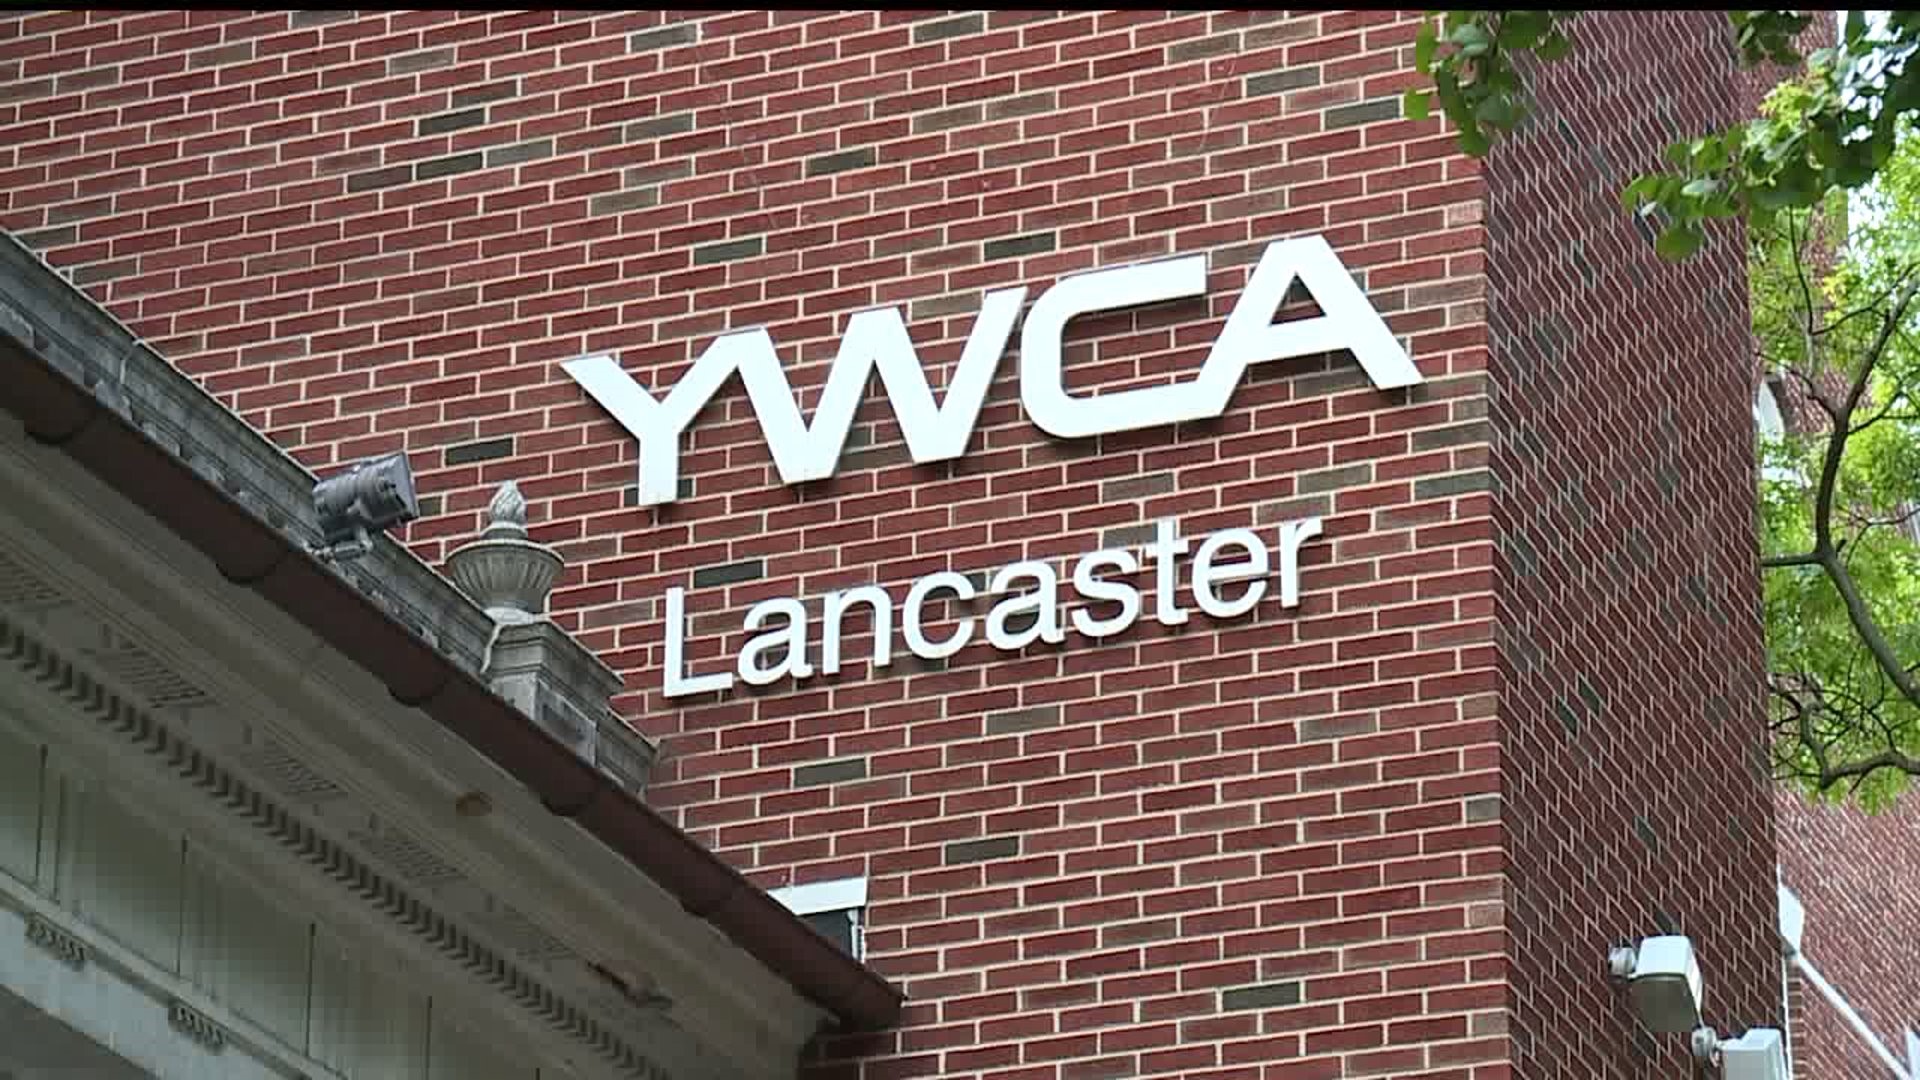 YWCA Lancaster holds annual Racial Justice Institute, days after Charlottesville rally